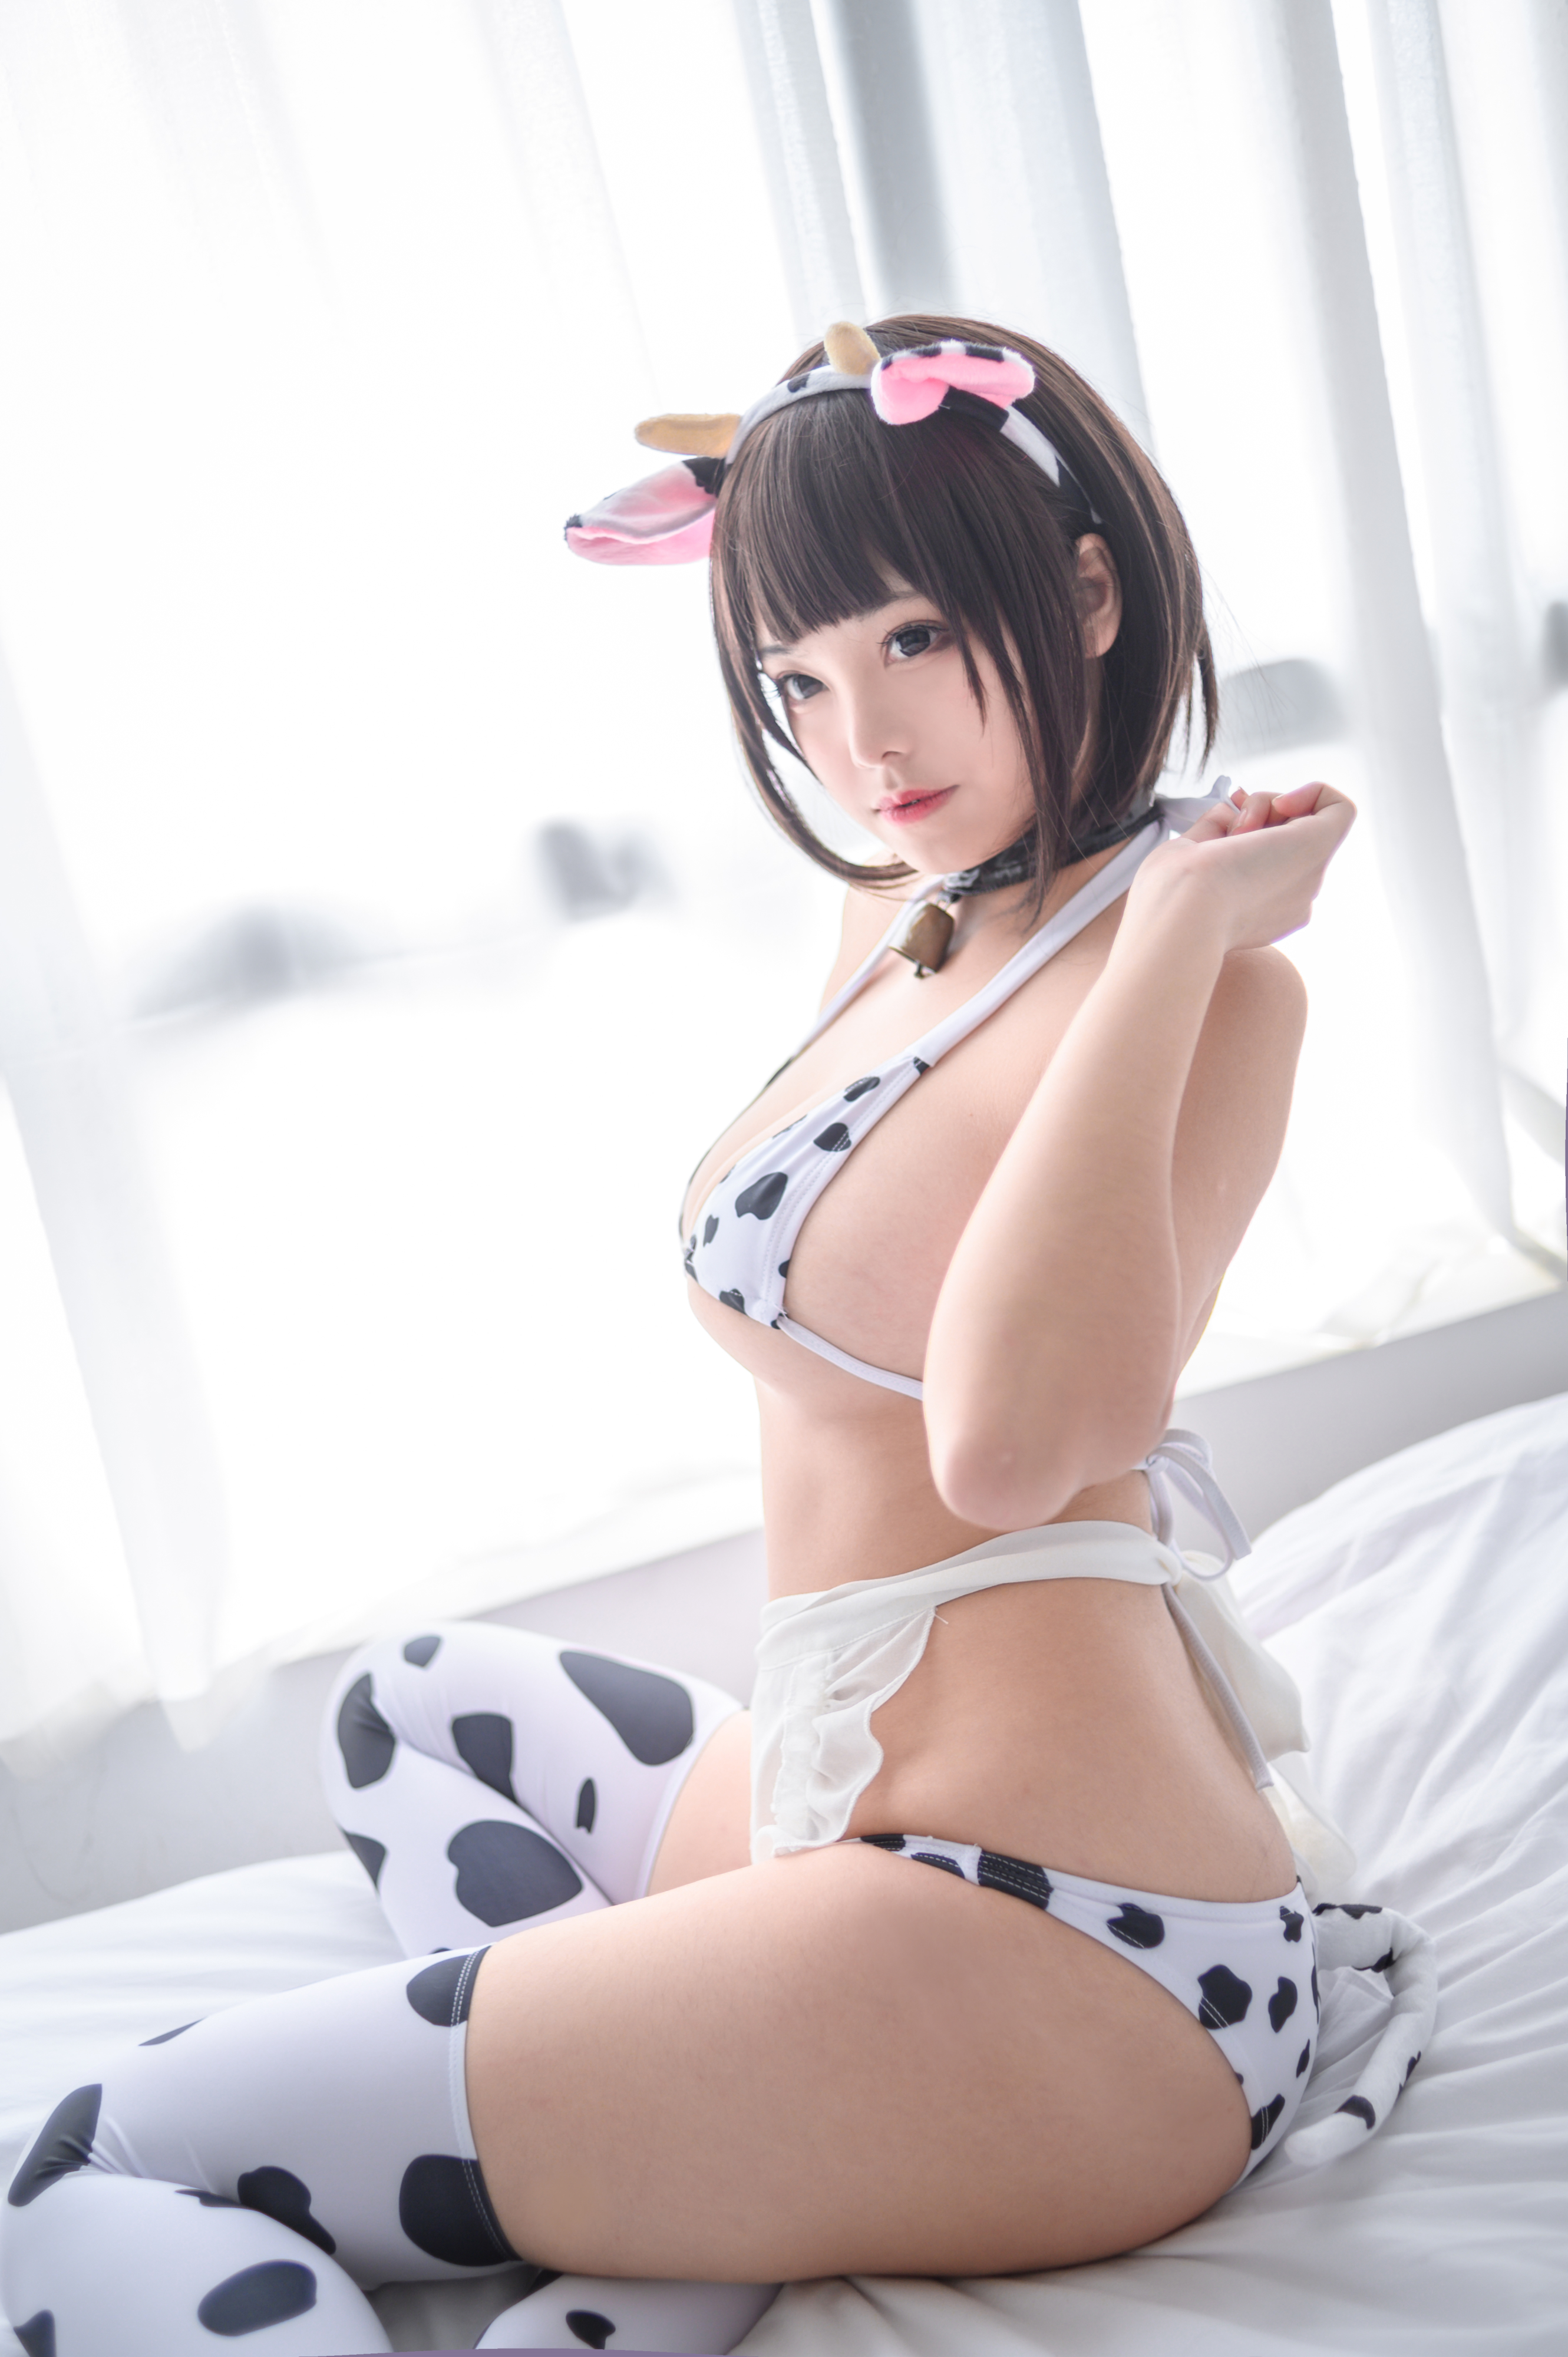 People 2661x4000 Mizhimaoqiu Asian women model brunette cosplay cow girl cowkinis apron sitting thigh-highs stockings in bed indoors portrait display women indoors